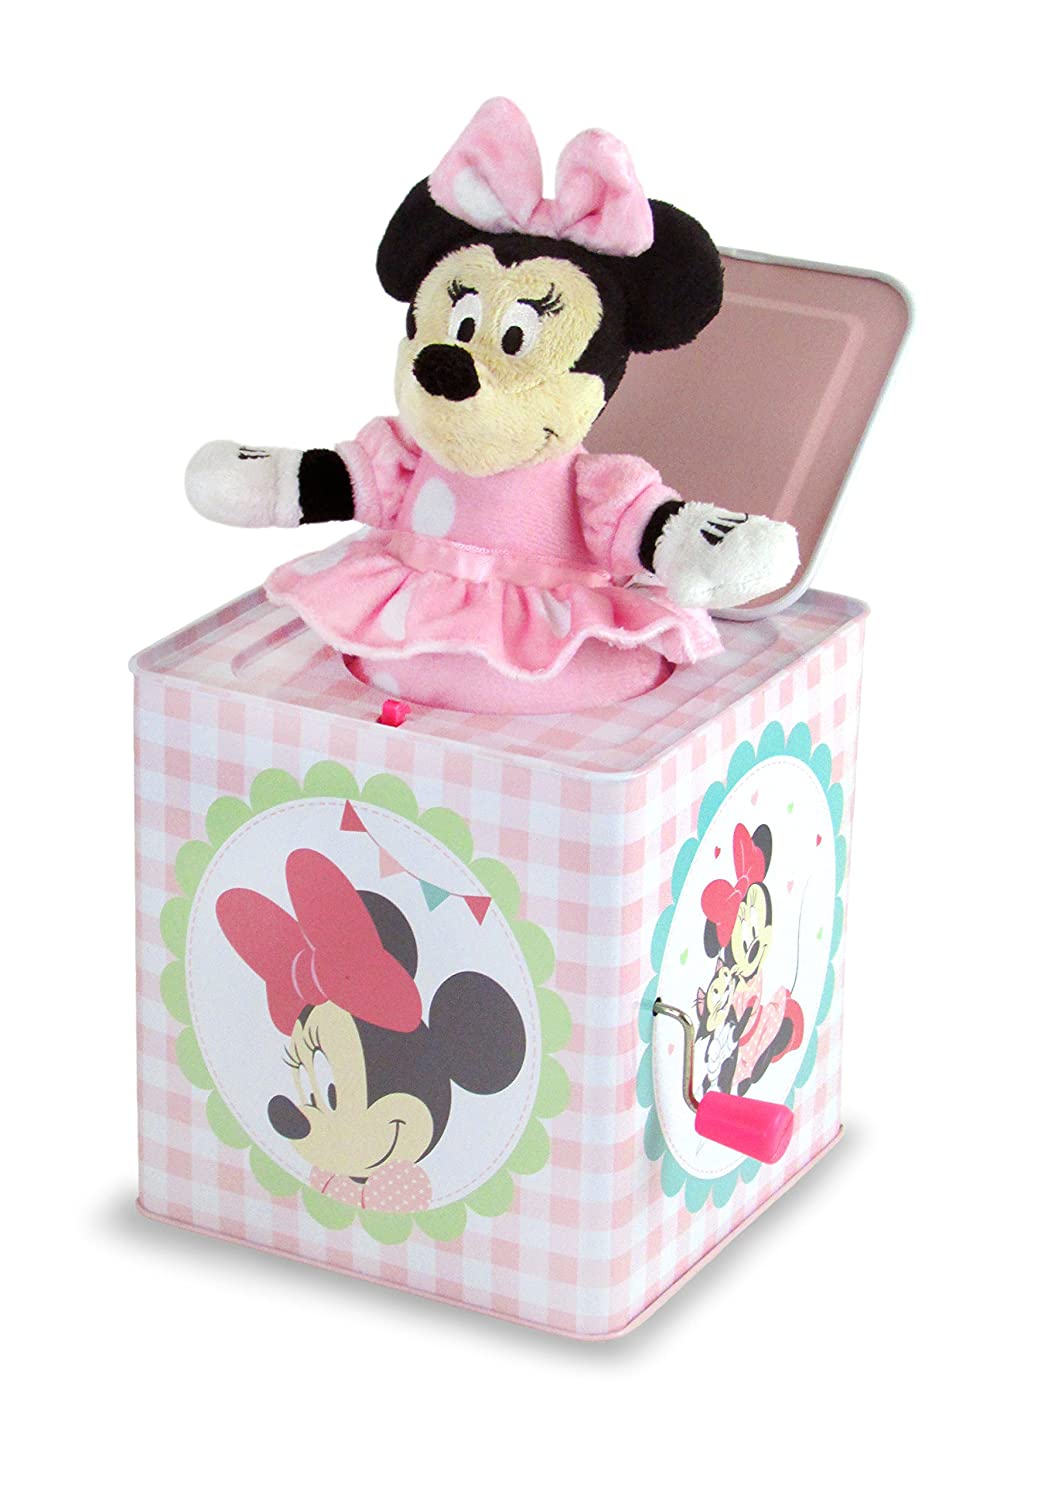 Disney Baby Minnie Mouse Jack-in-The-Box, 6.25"